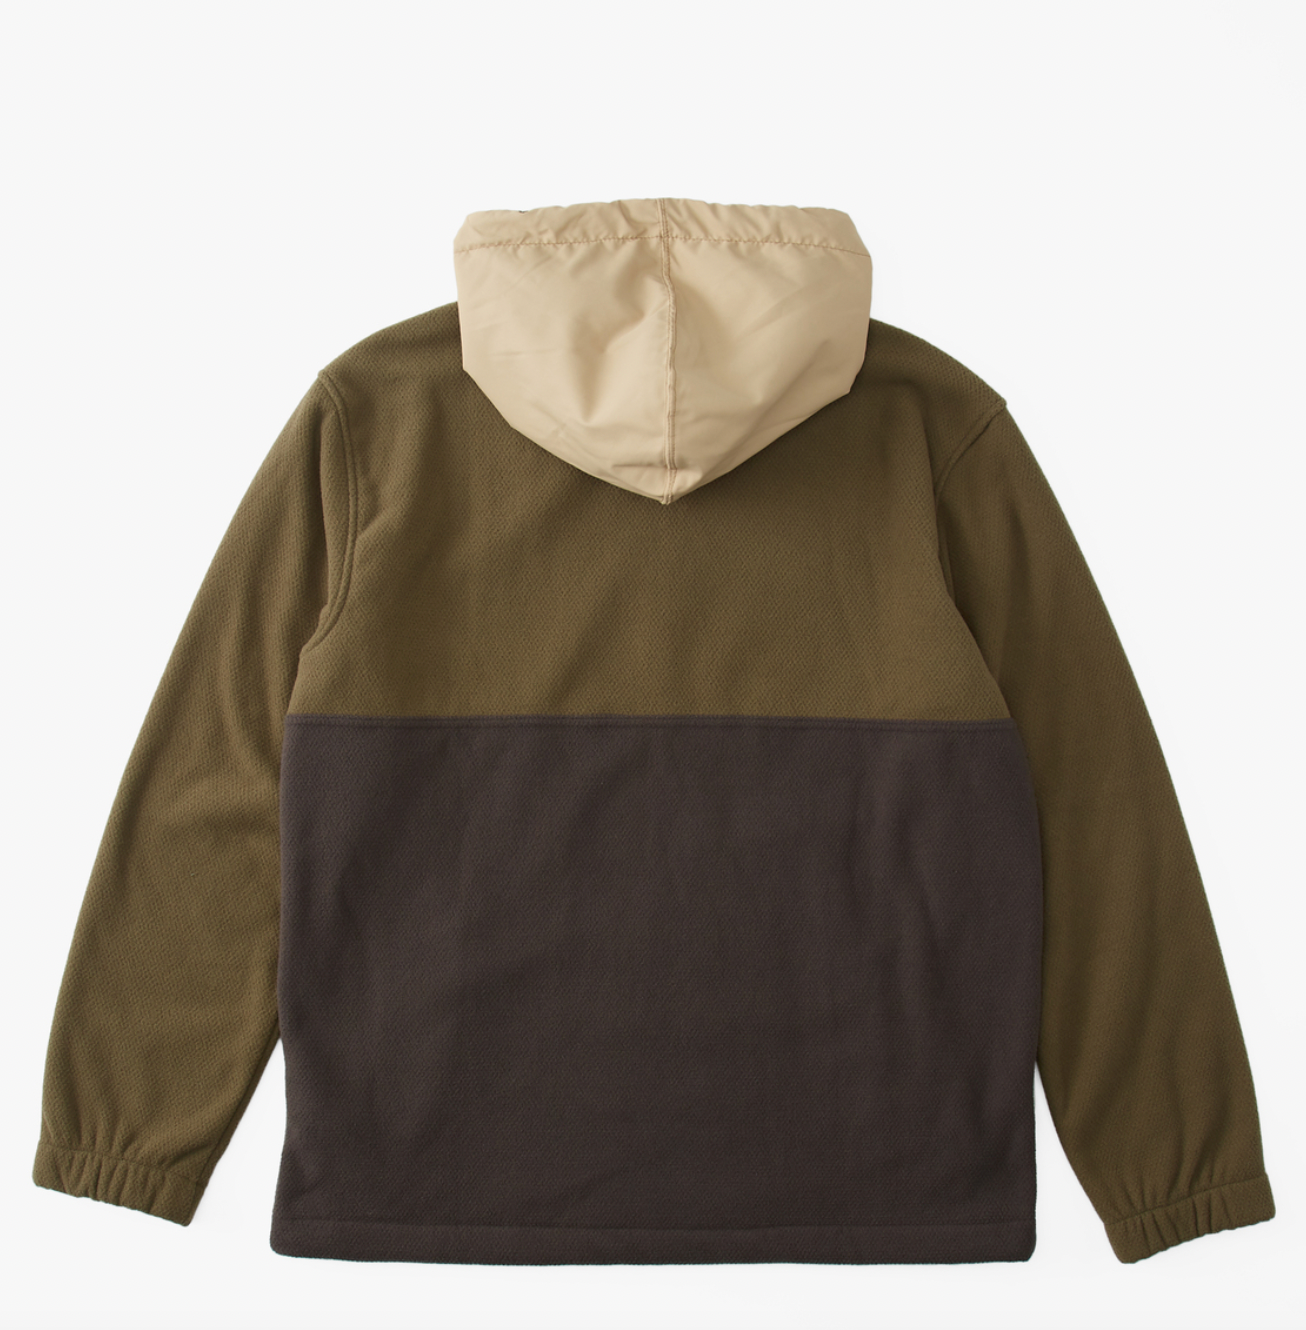 A/Div Boundary Pullover Hooded Half-Zip Pullover - MILITARY